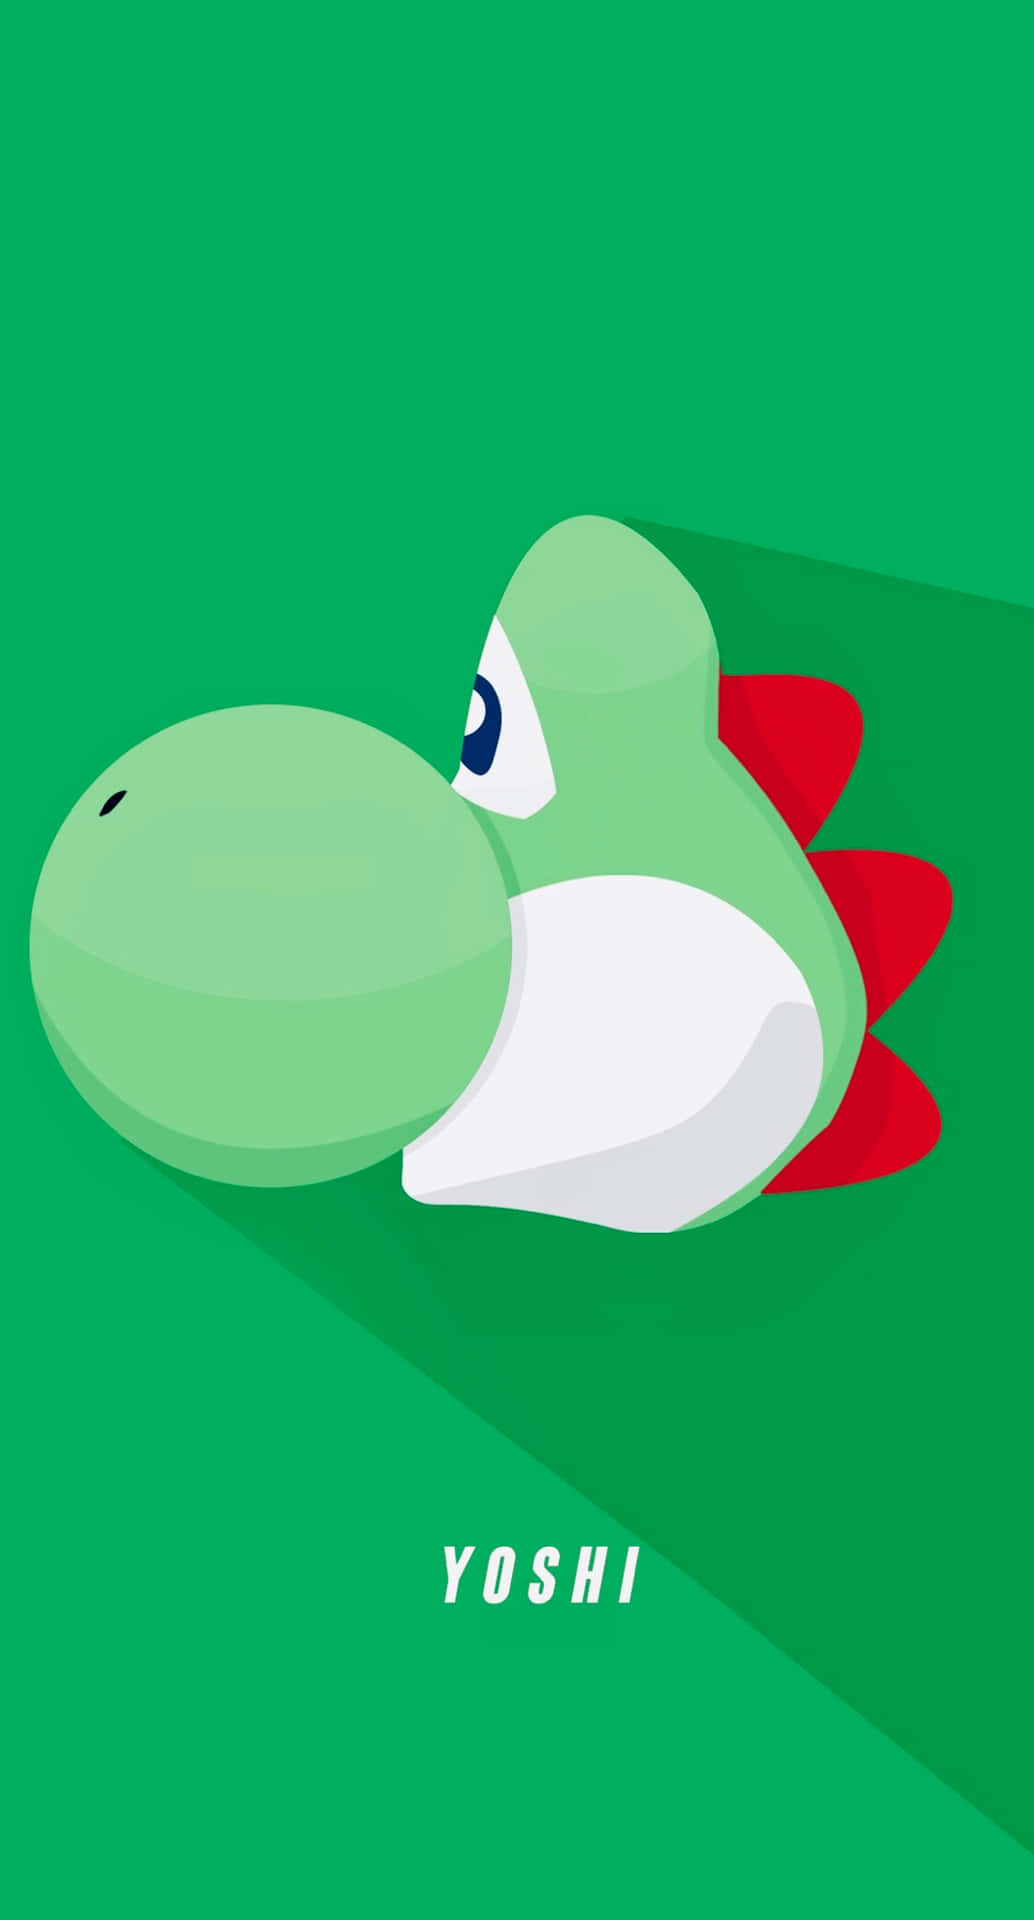 A Green Background With A Yoshi Character On It Background